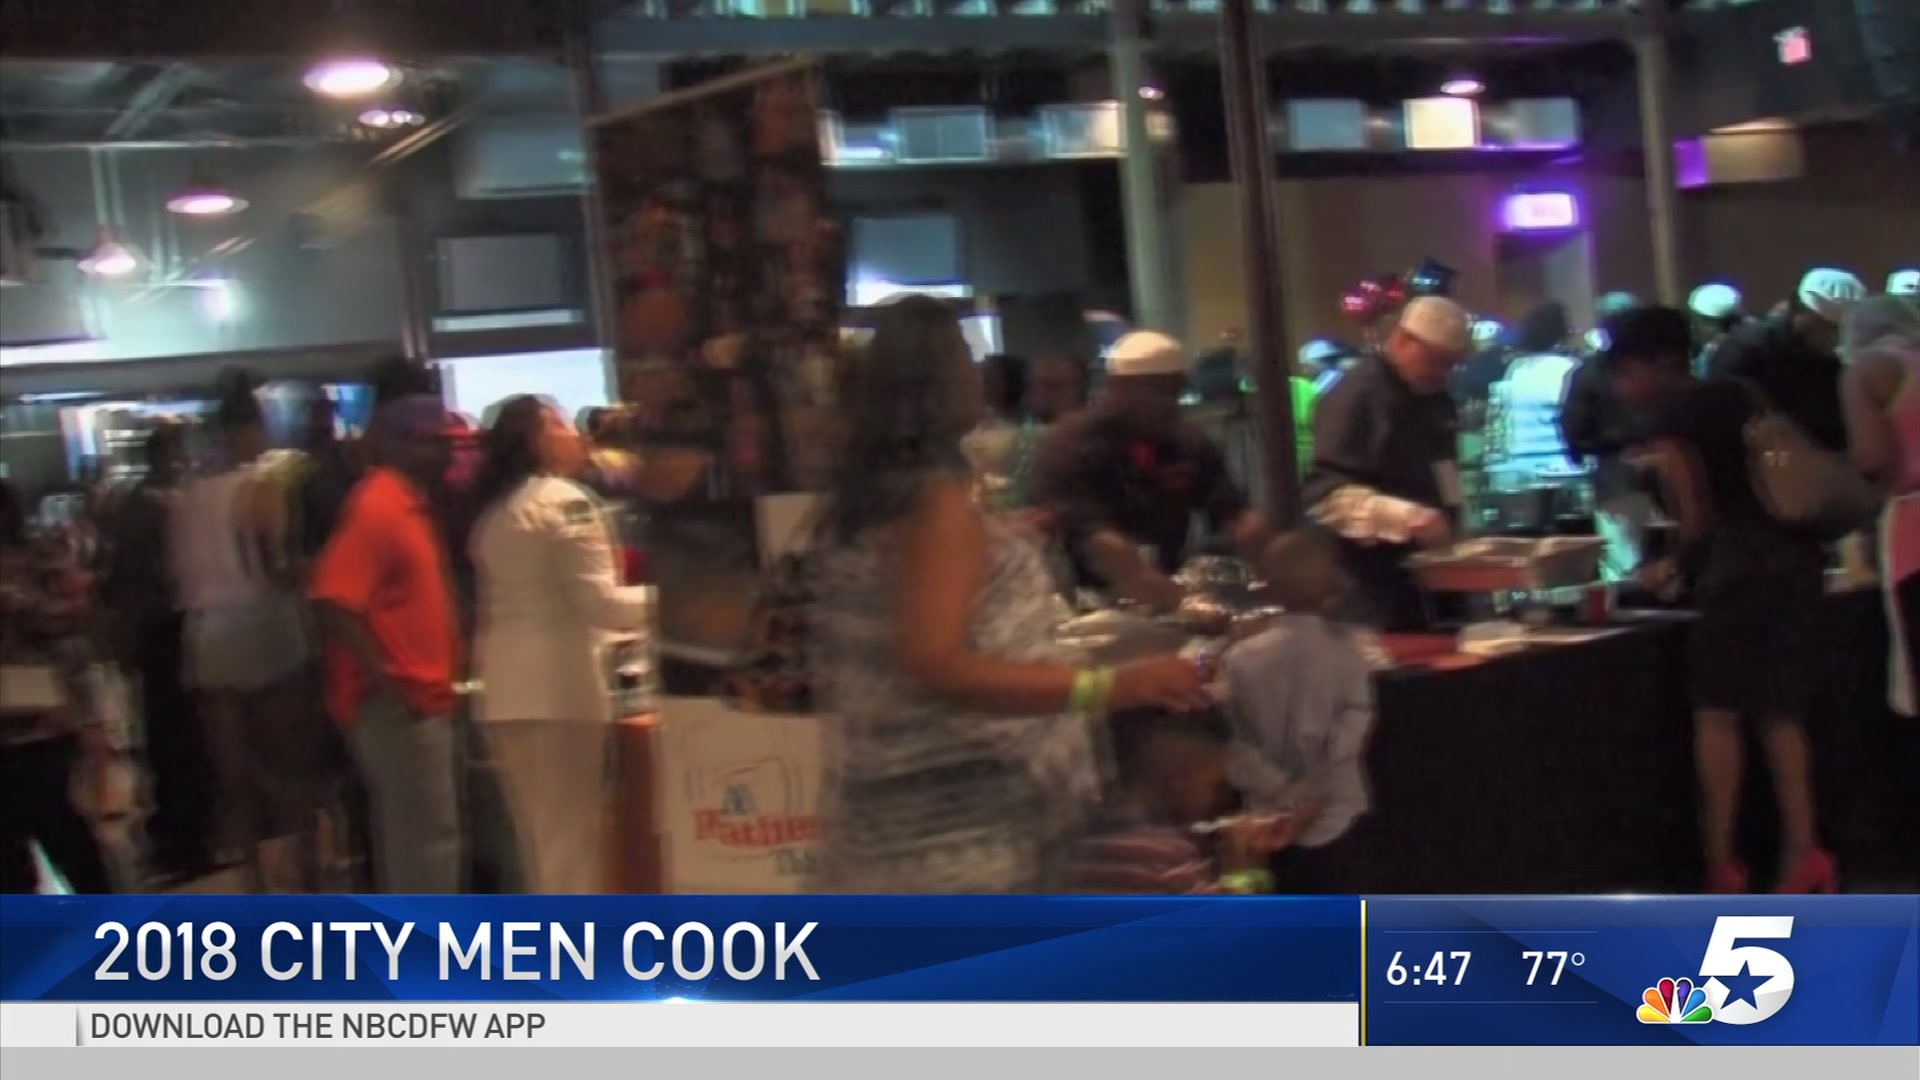 City Men Cook Set to Hold 'Largest Sunday Dinner in N. Texas